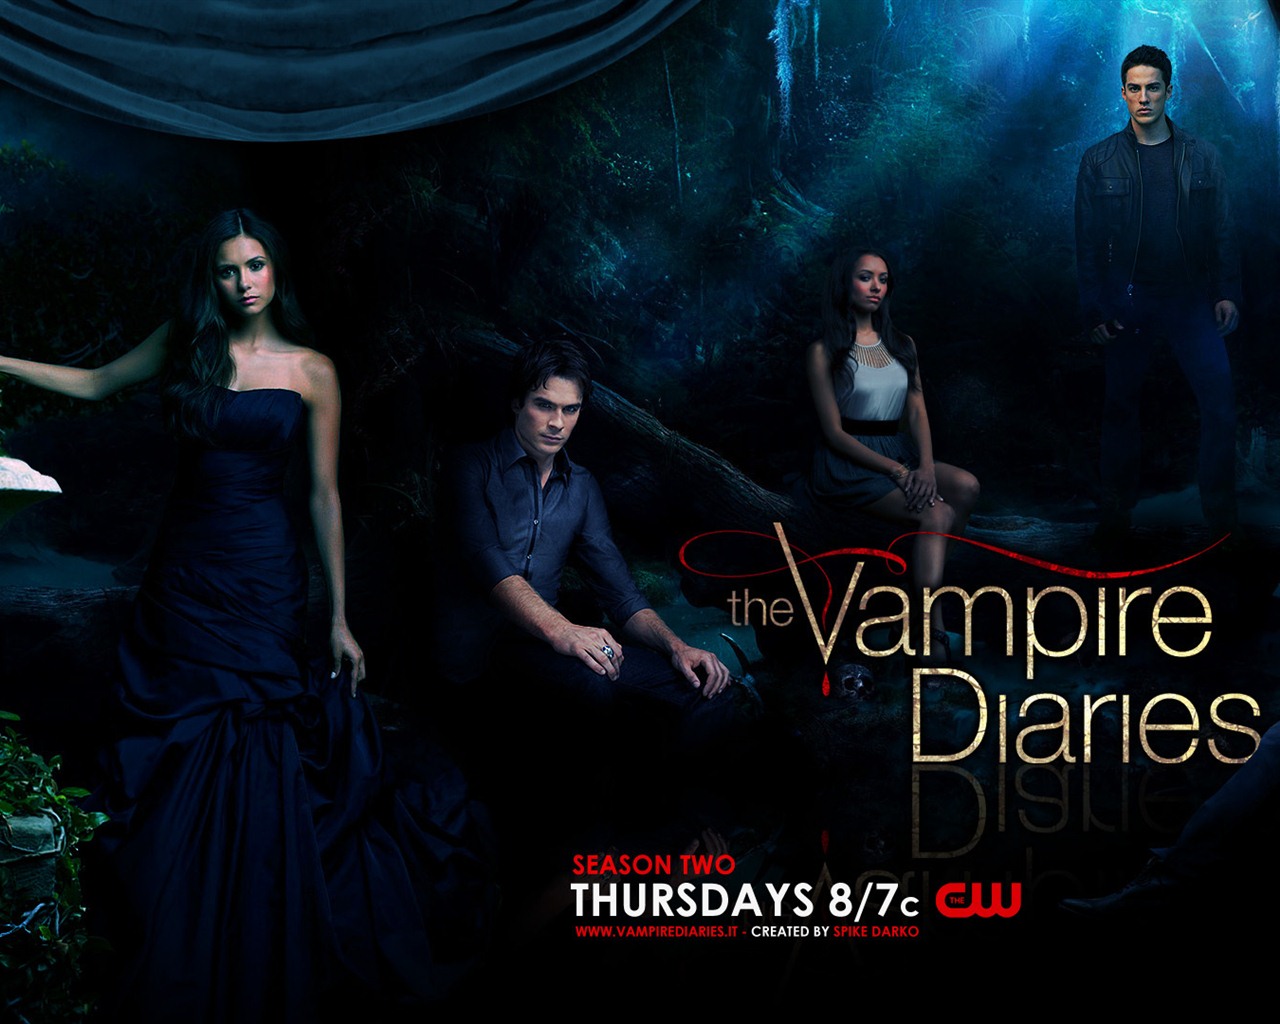 The Vampire Diaries HD Wallpapers #18 - 1280x1024